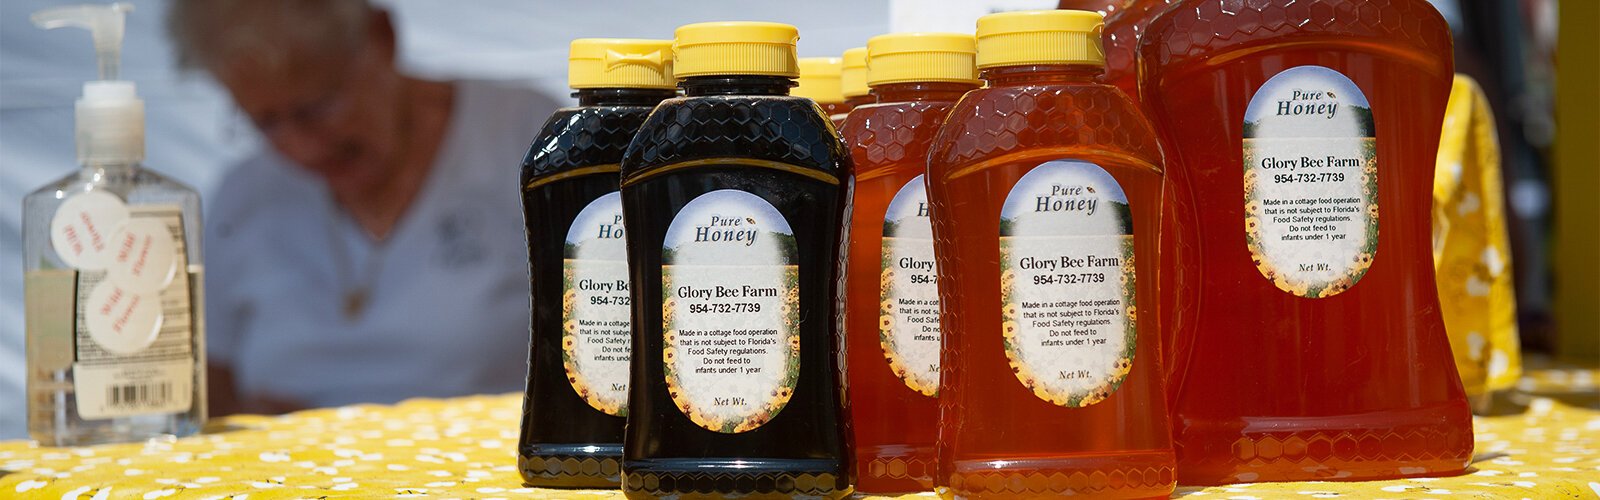 Bottles of ‘pure honey’ from Glory Bee Farm are displayed at The Market Marie in Clearwater.